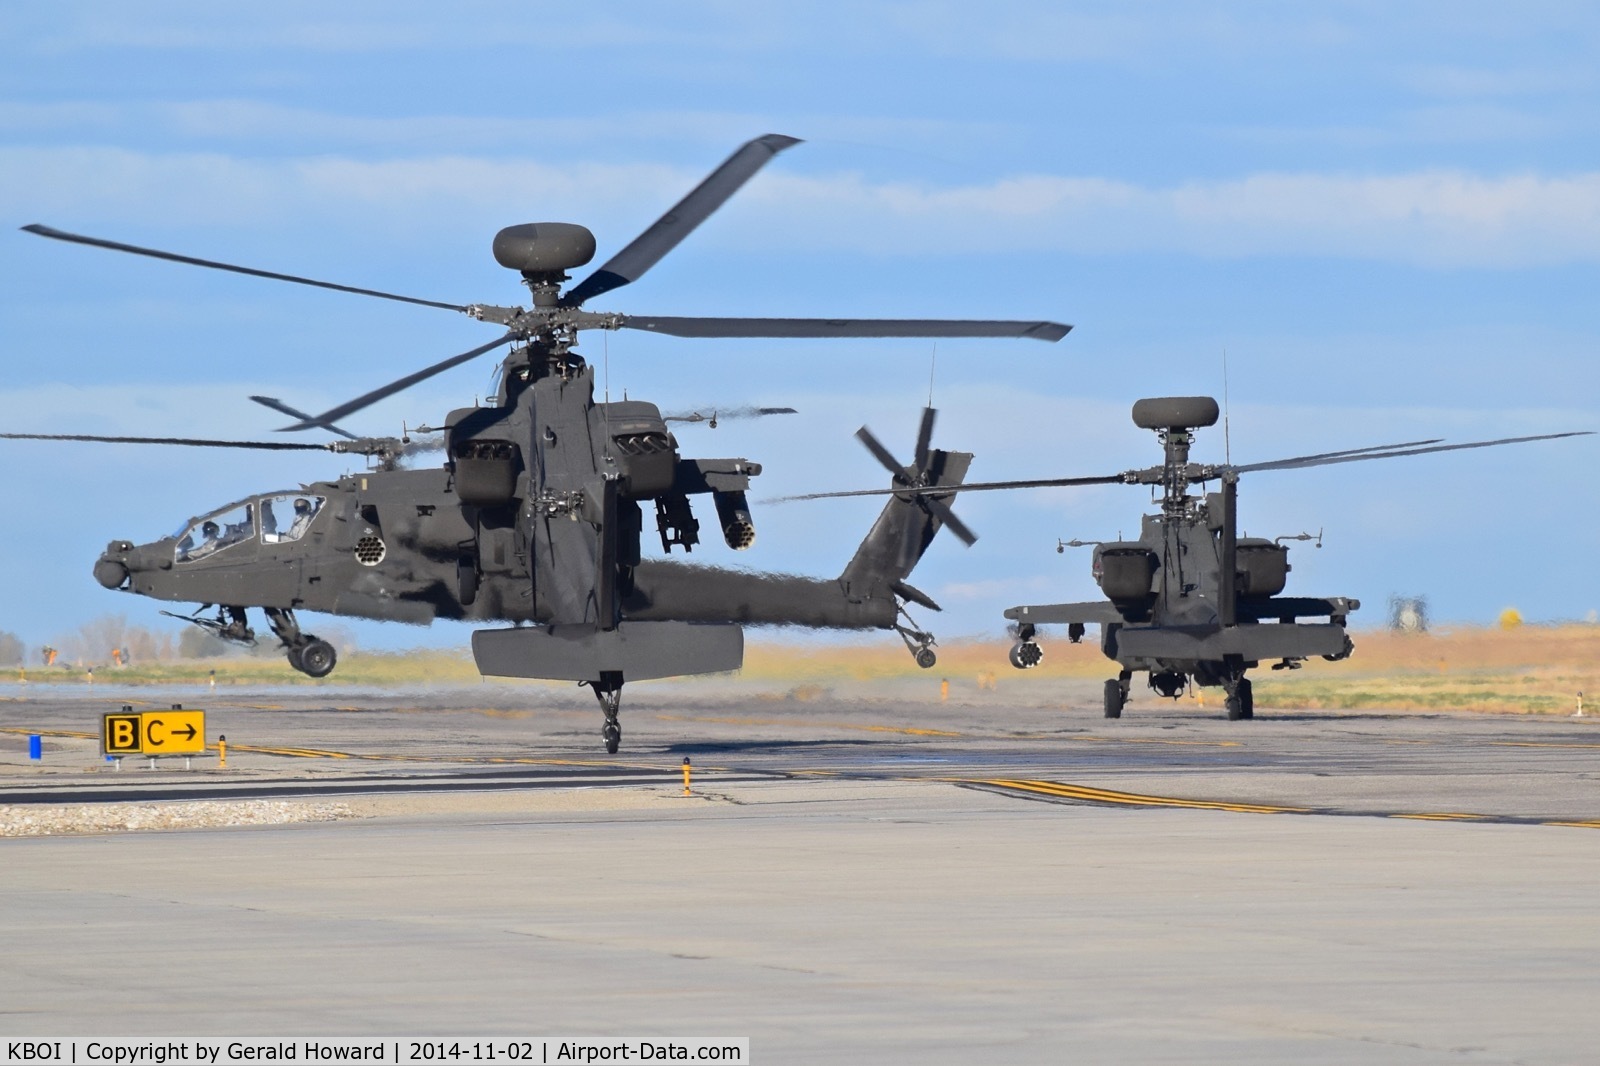 Boise Air Terminal/gowen Fld Airport (BOI) - AH-64s from the 1-183rd AVN BN, Idaho Army National Guard forming up on Taxiway Bravo.
